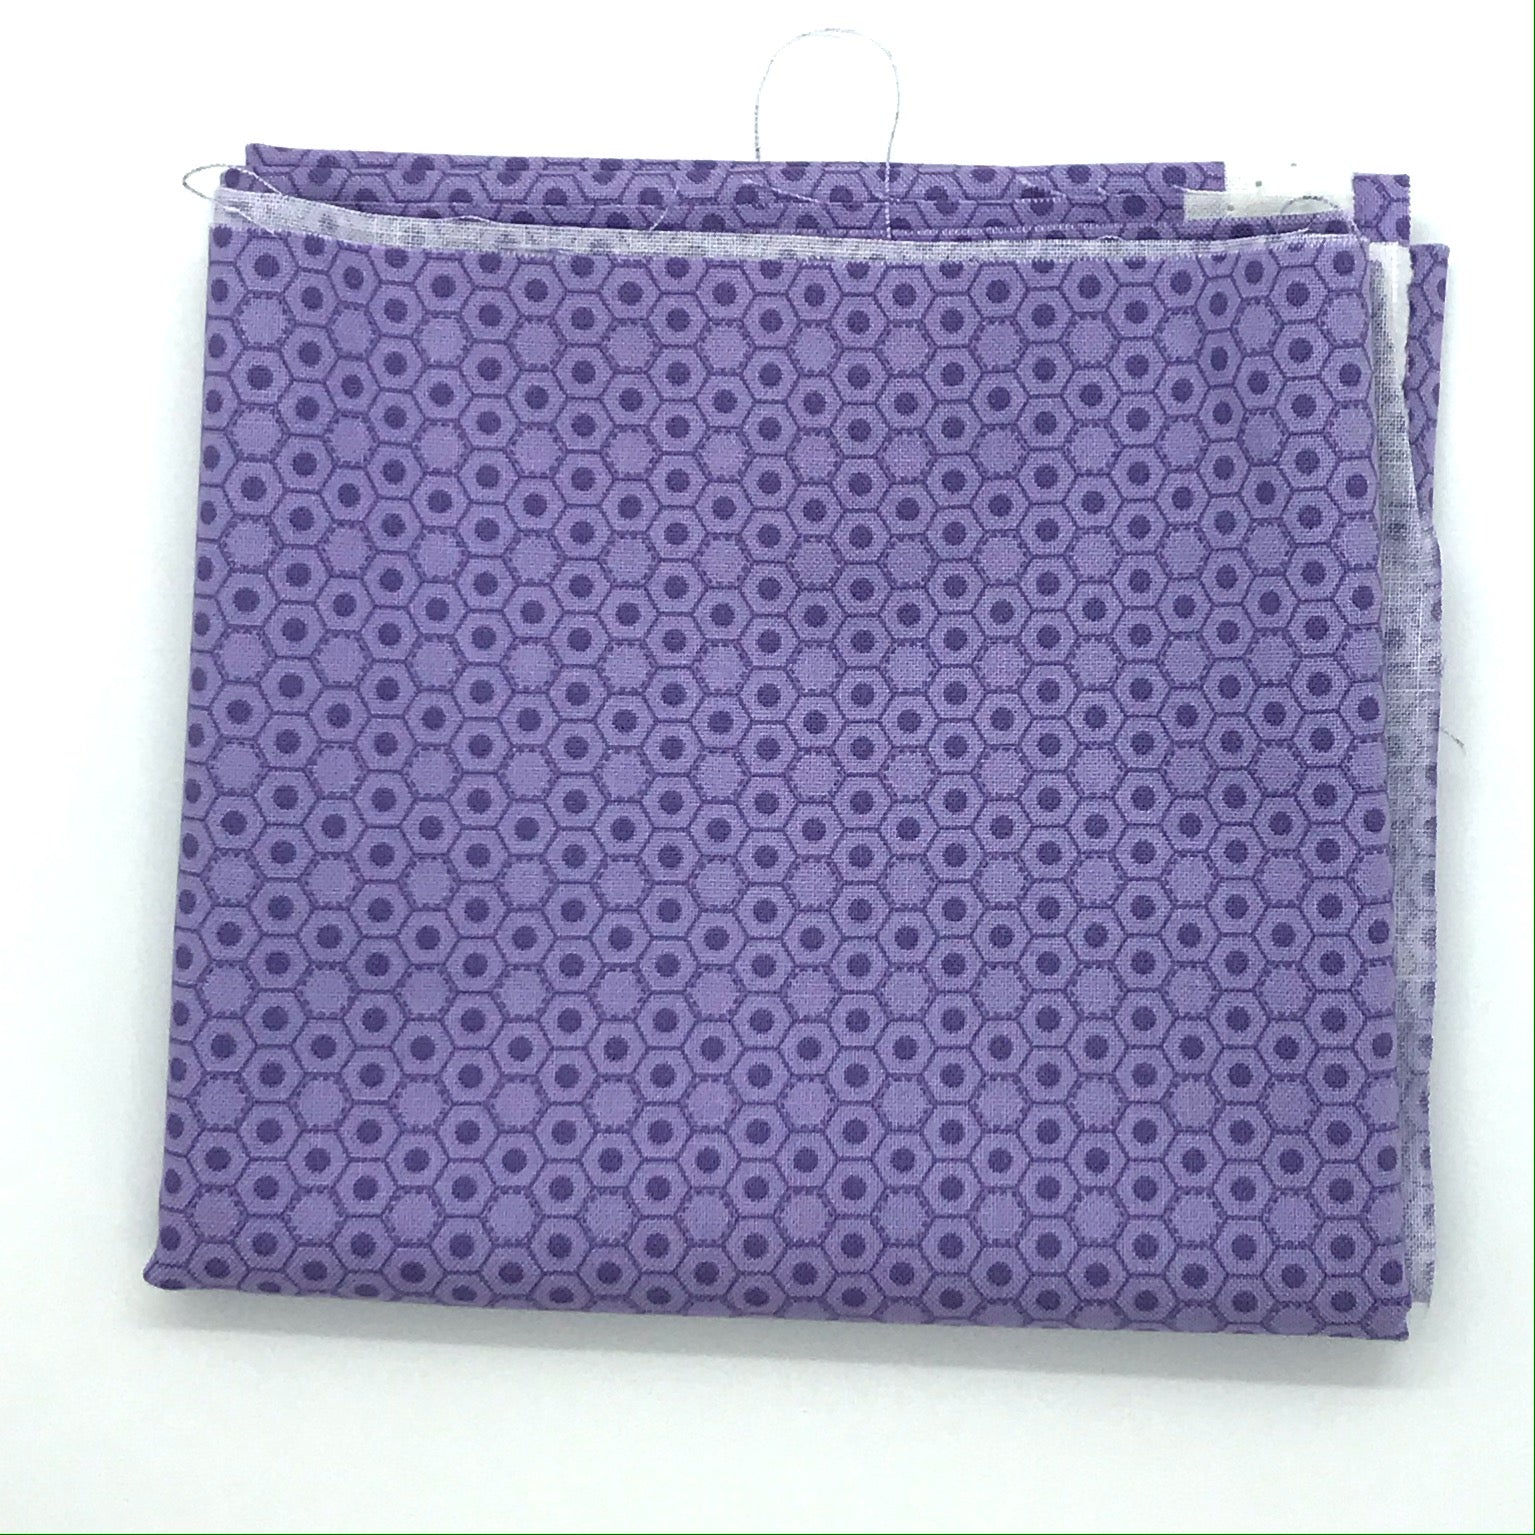 hexagon pattern from the Red Rooster basically hugs collection in purple